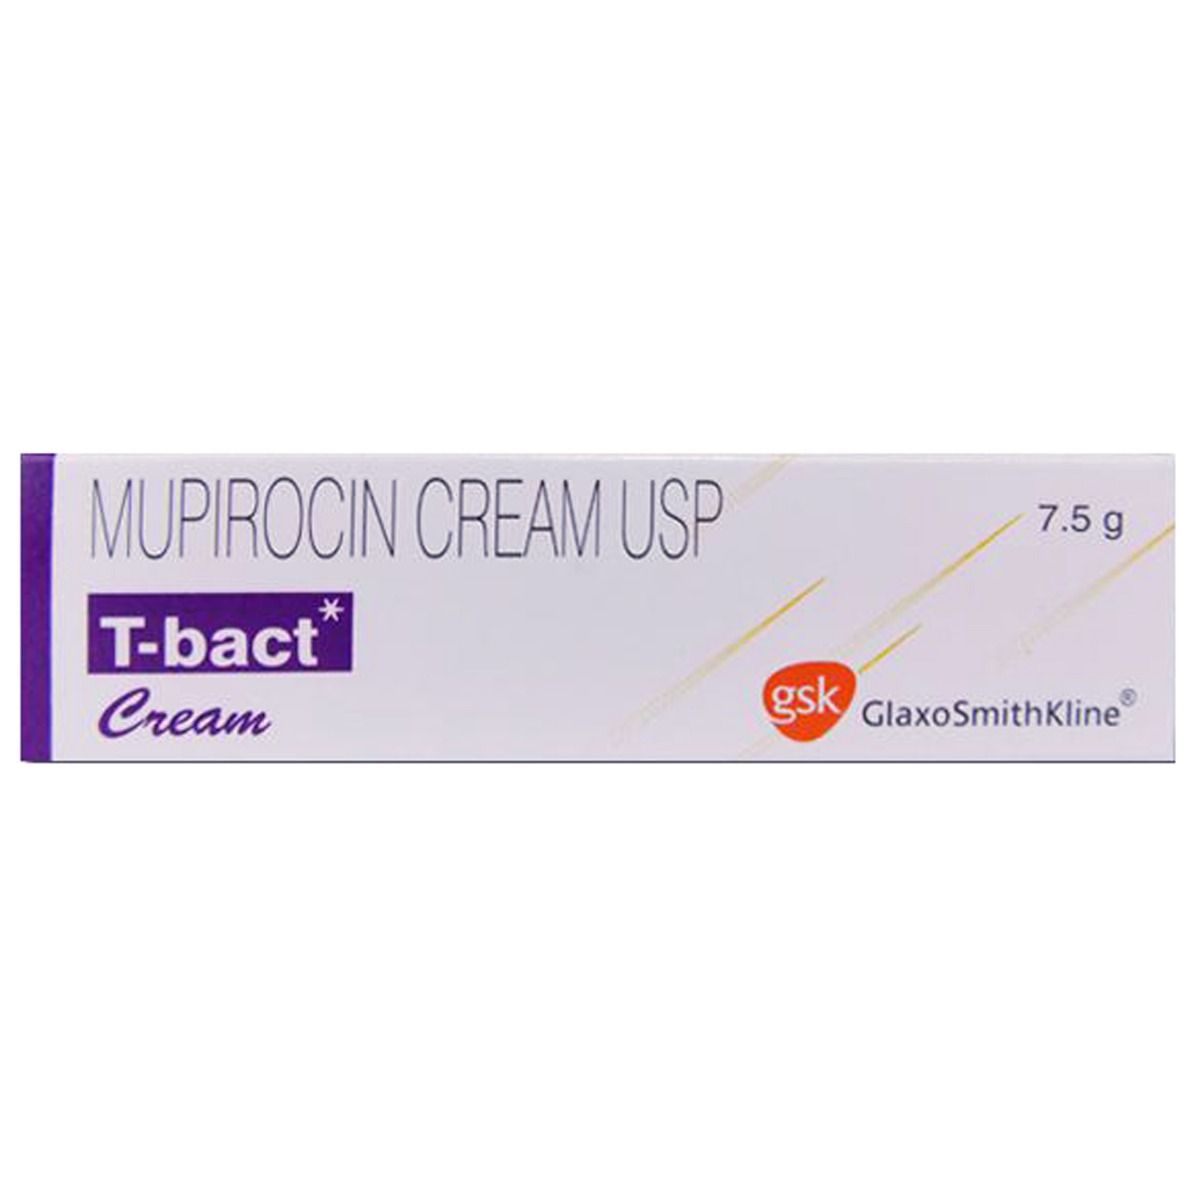 T-Bact Cream 7.5 gm Price, Uses, Side Effects, Composition ...